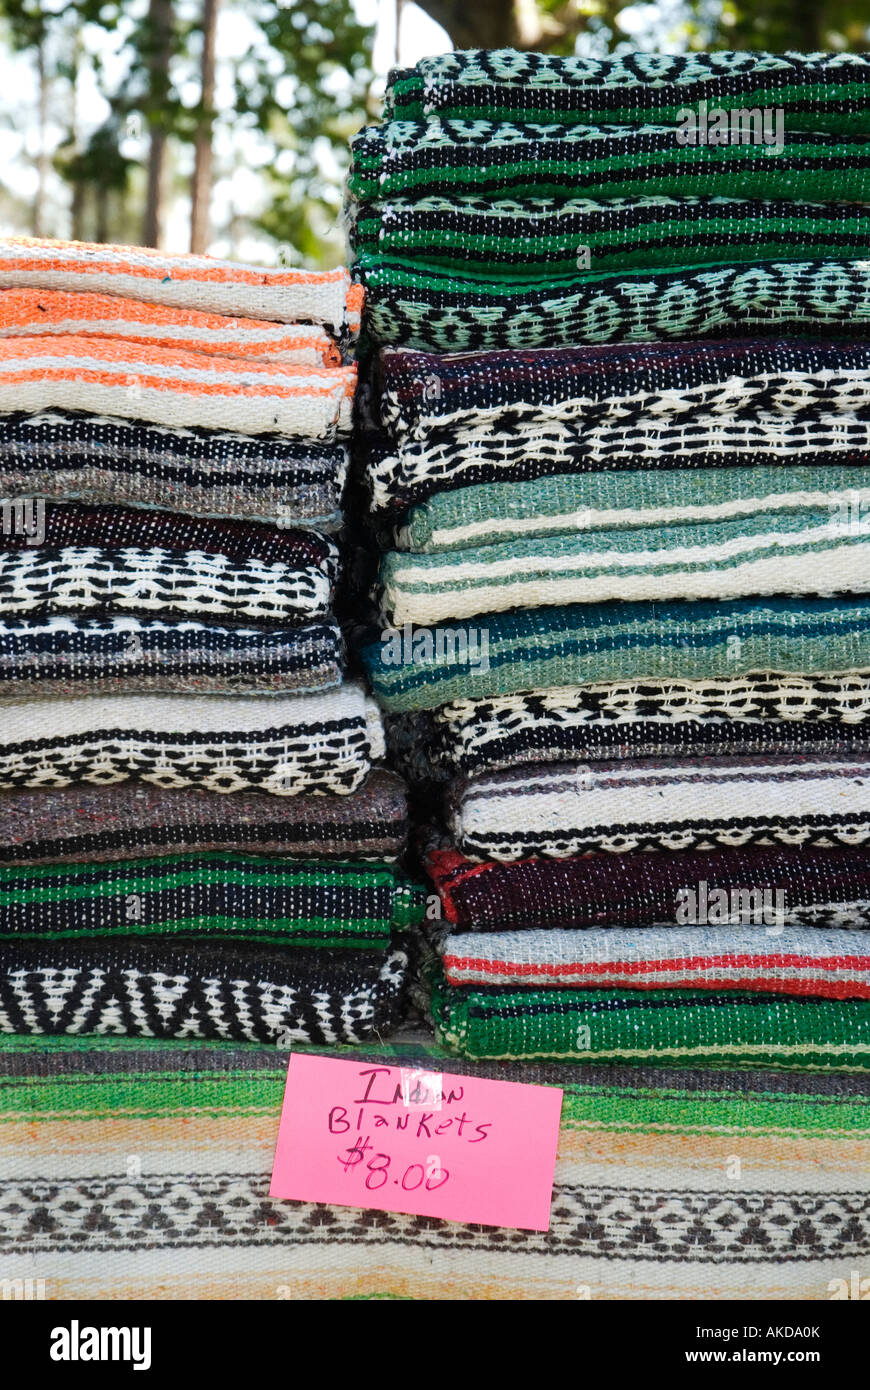 Native American Indian Blankets For Sale At Trading Post Alligator Stock Photo Alamy